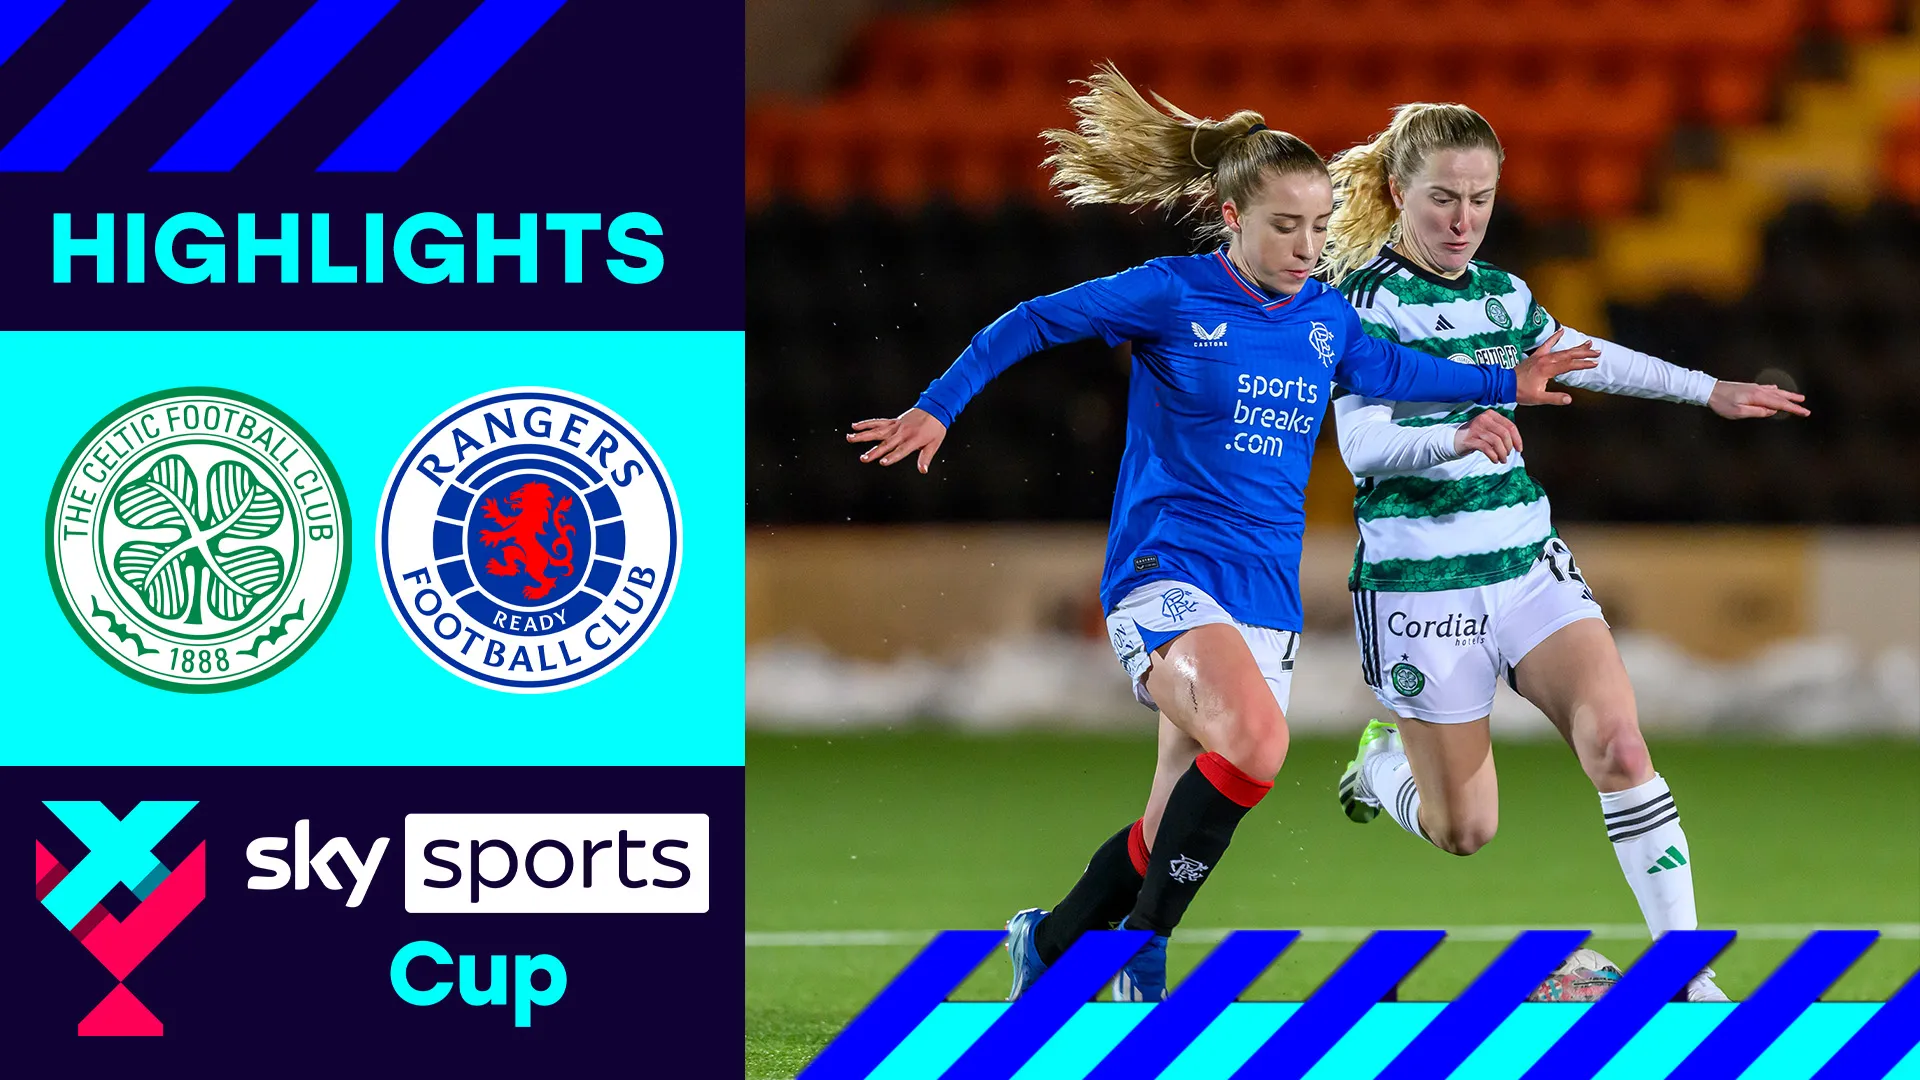 Image for Celtic 2-3 Rangers | Gers reach Sky Sports Cup Final with dramatic win over Celtic | SWPL